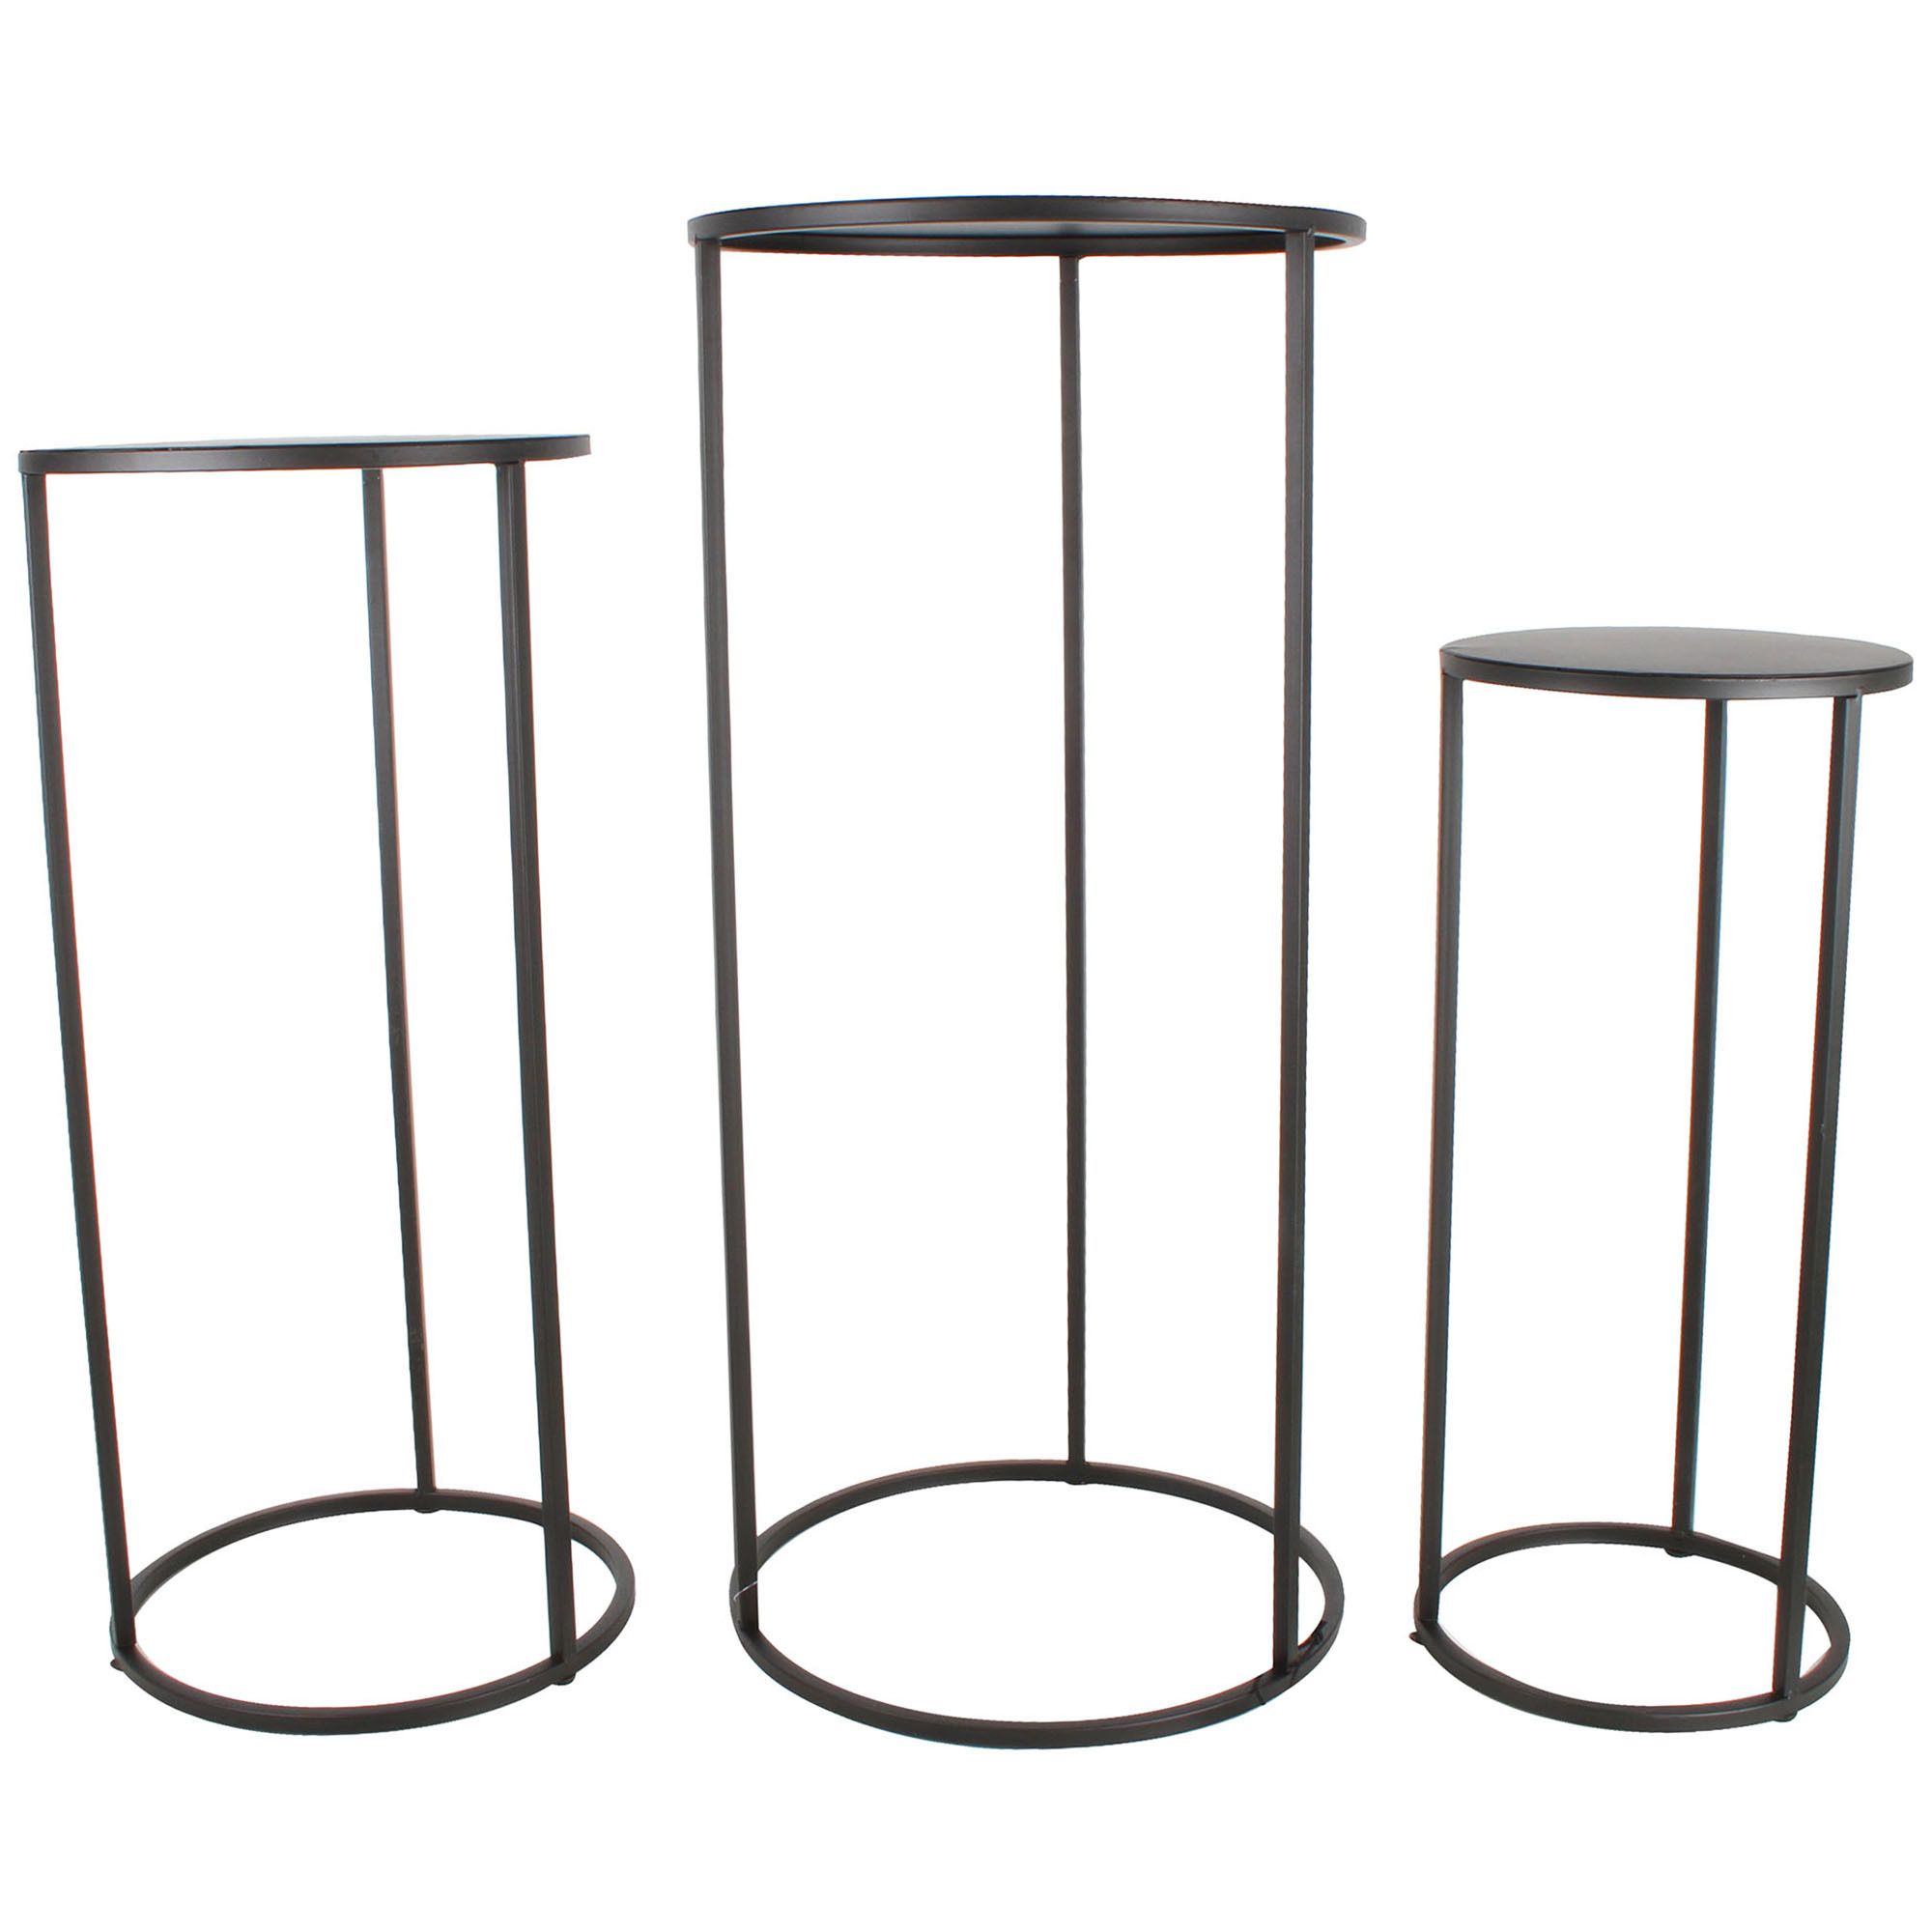 3 Piece Matte Black Ekon Metal Plant Stand Set | Temple & Webster Pertaining To Black Plant Stands (View 11 of 15)